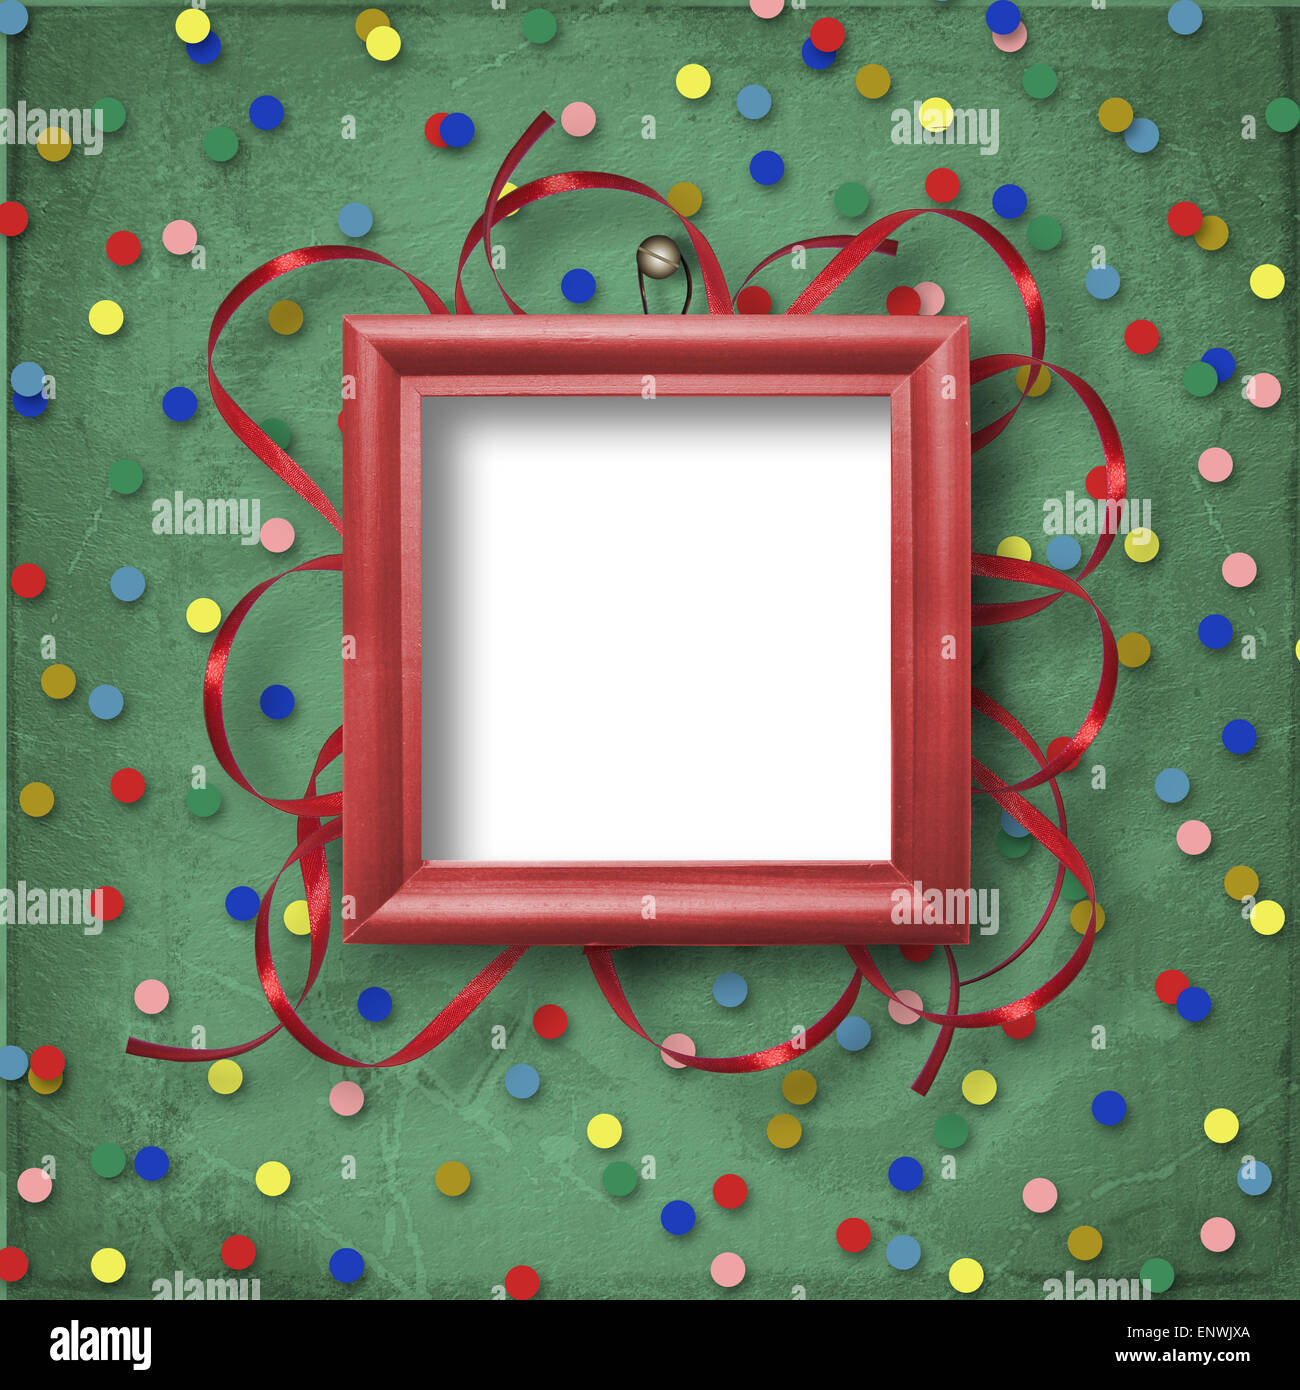 Wooden framework for portraiture on the abstract background with confetti and ribbon Stock Photo